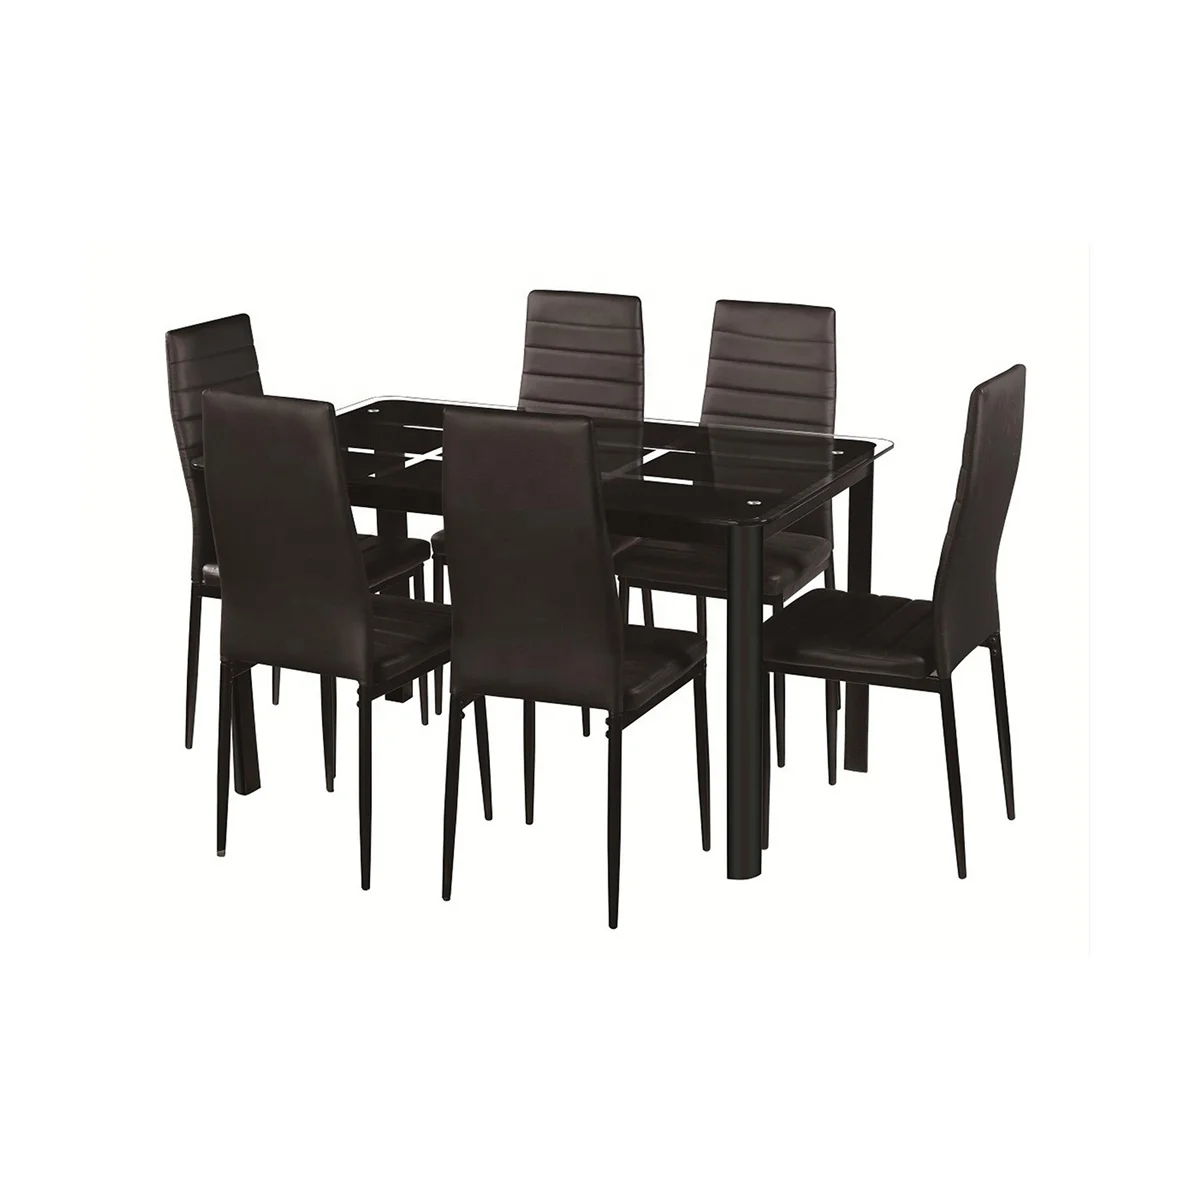 Small Hideaway Space Saving Kitchen Furniture Banquet Modern Glass Top Dinning Dining Table And 6 Chair Set Buy Hideaway Dining Table And Chair